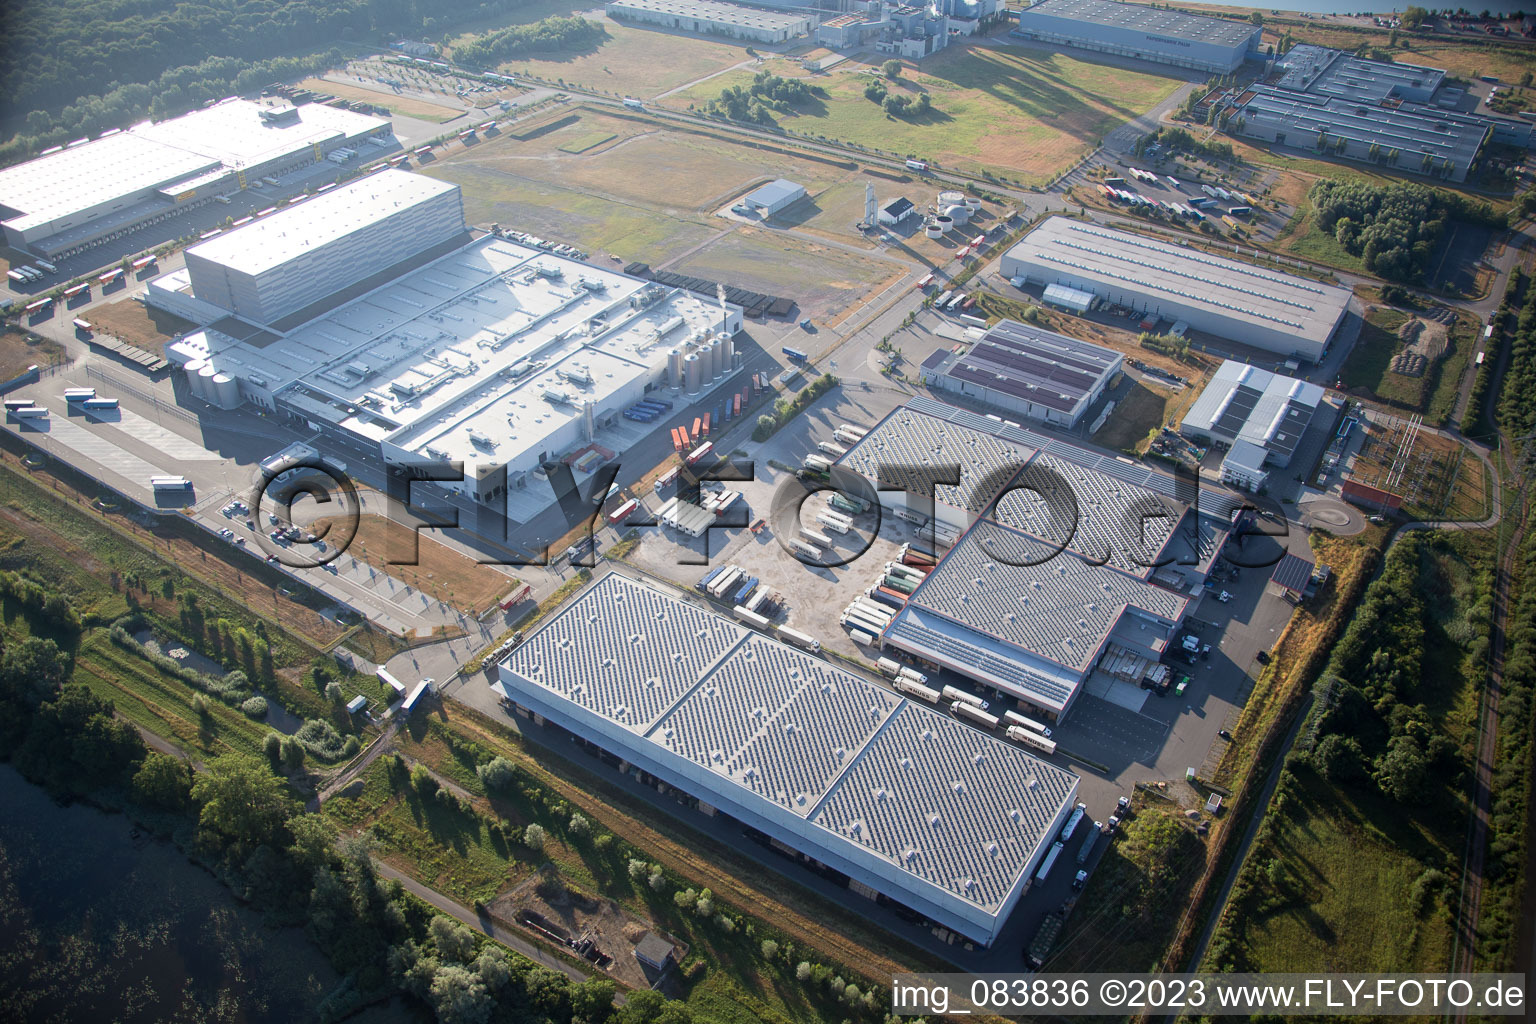 Oberwald industrial area in Wörth am Rhein in the state Rhineland-Palatinate, Germany from a drone